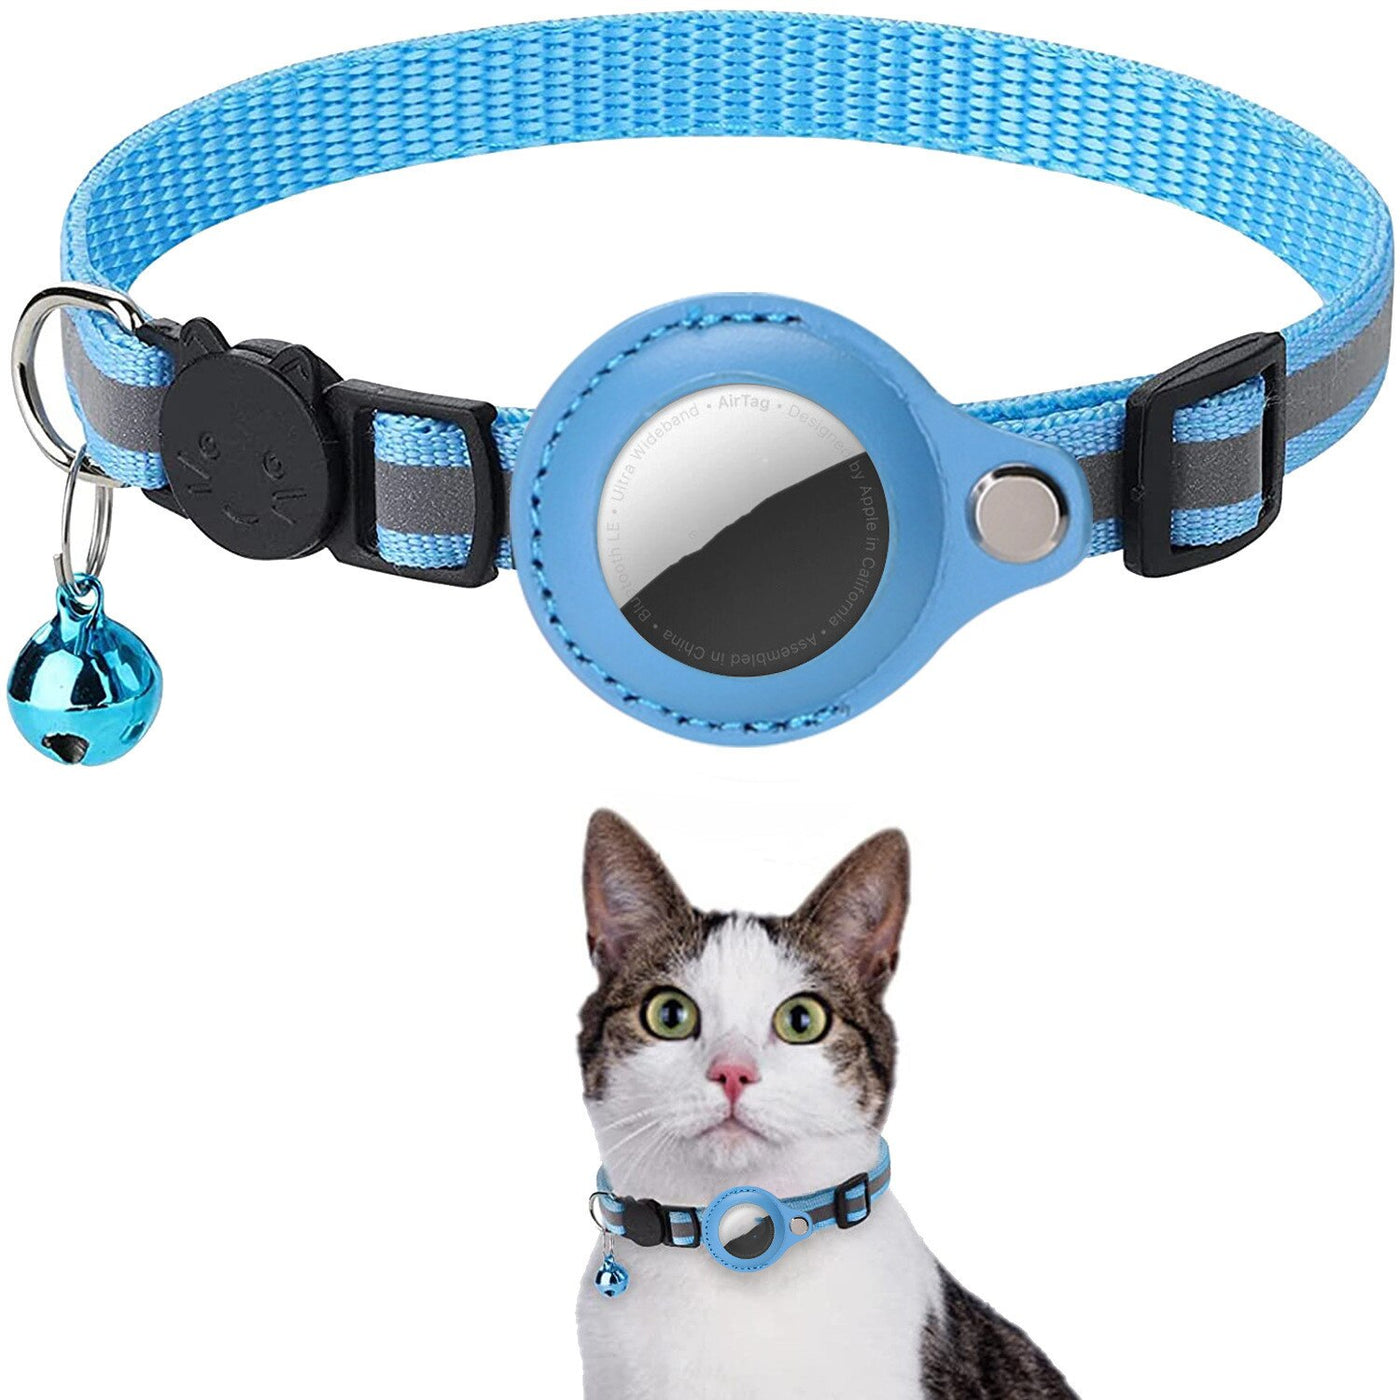 Adjustable Cat Collar w/ Protective AirTag (not included) Cover